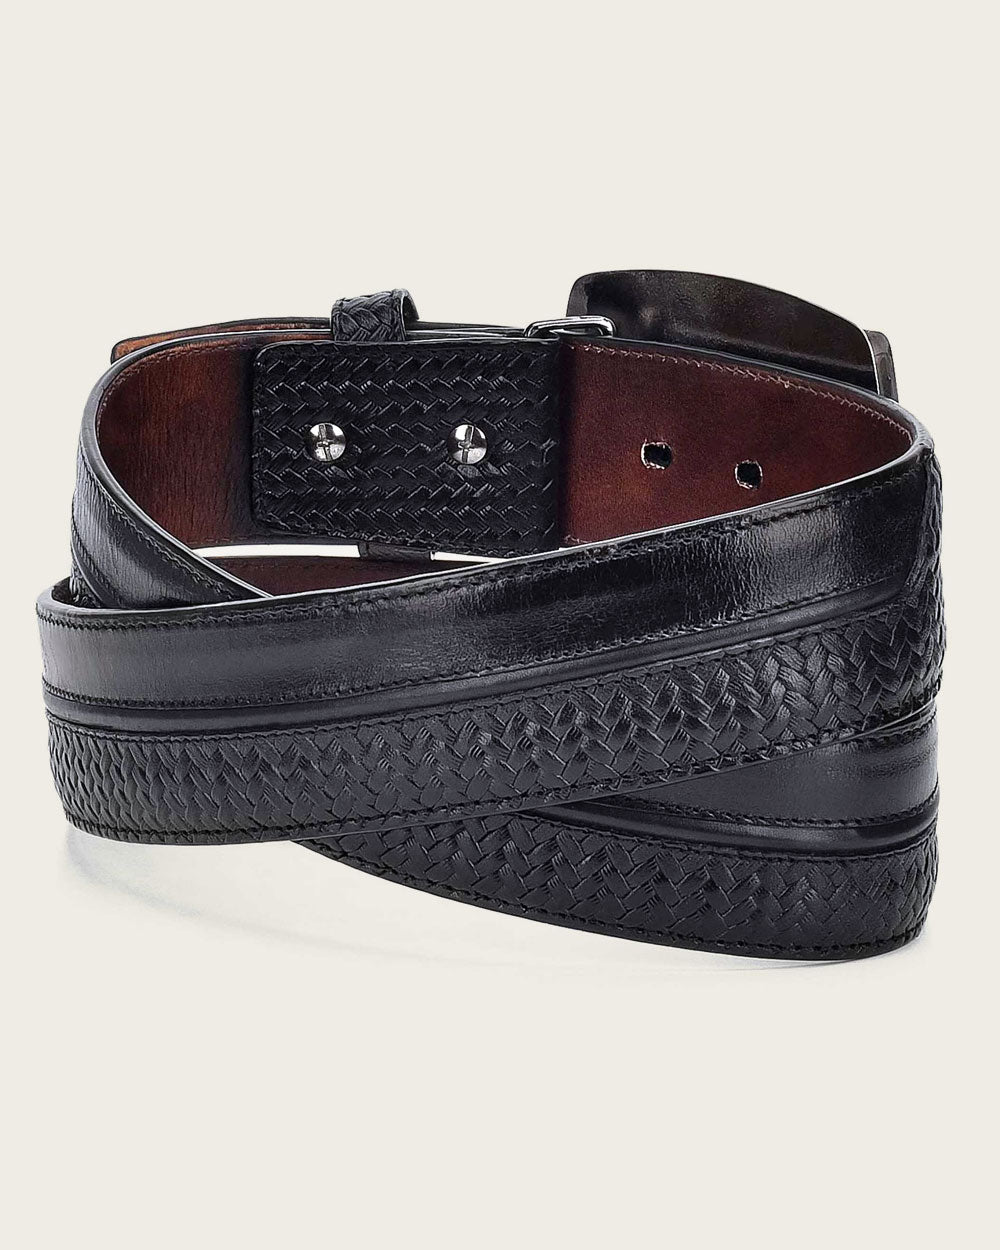 45mm Buckle with Metal Details: This Western belt features a bold 45mm buckle for a distinctive touch. 